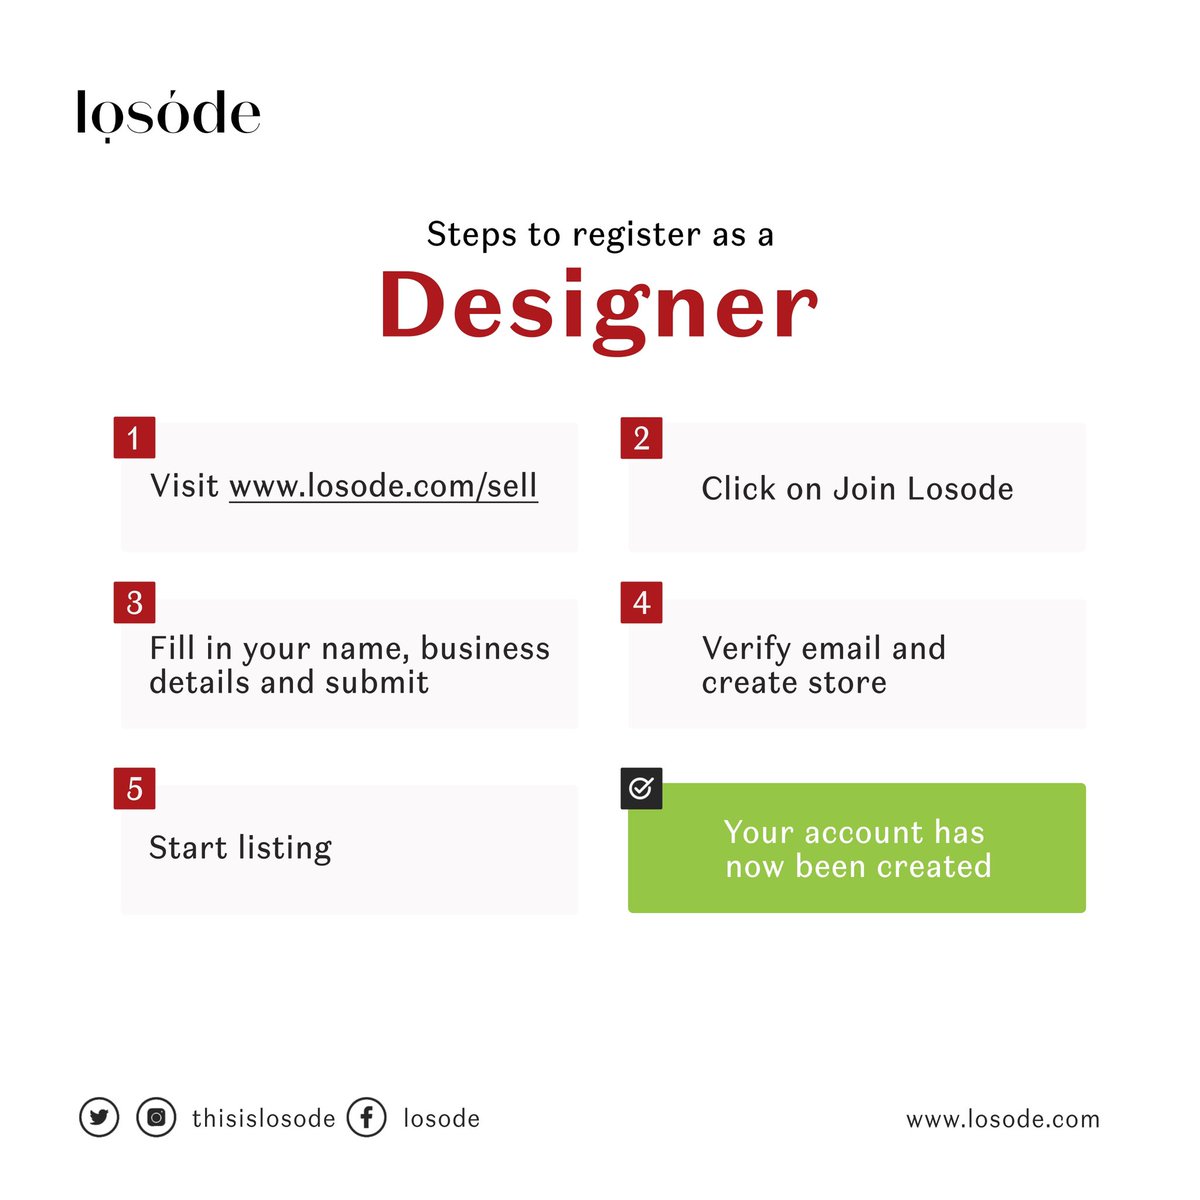 Join Losode now at losode.com/sell

 #digital #Africa #commerce #style #fashion #blackownedbusiness #losode #fashion #Africanfashion #fashiondesigner #fashionstyle #fashionbusiness #fashionAfrica #losodemarketplace #africanfashion #menstyle #menfashion #womenfashion